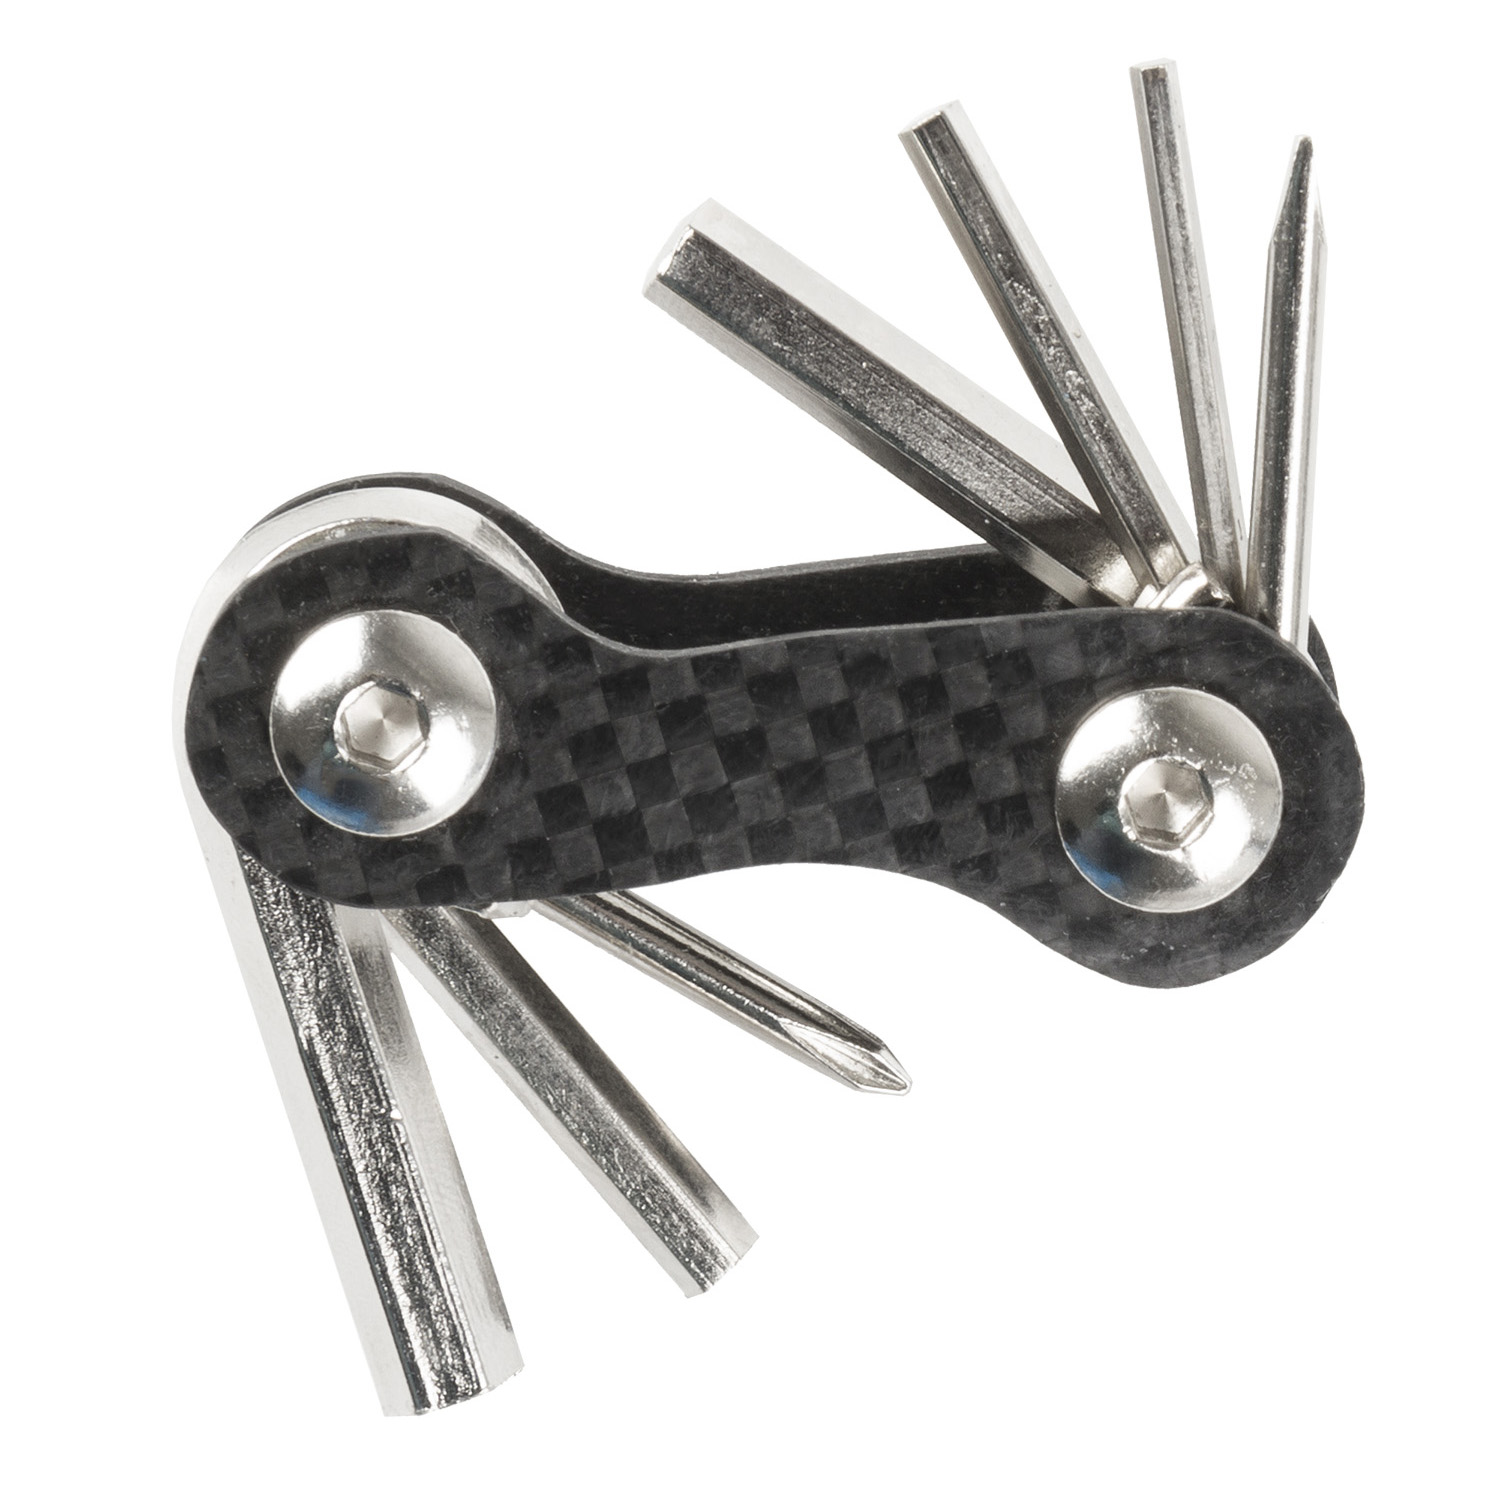 M-WAVE Mini 7 Carbon Multitool | Messingschlager